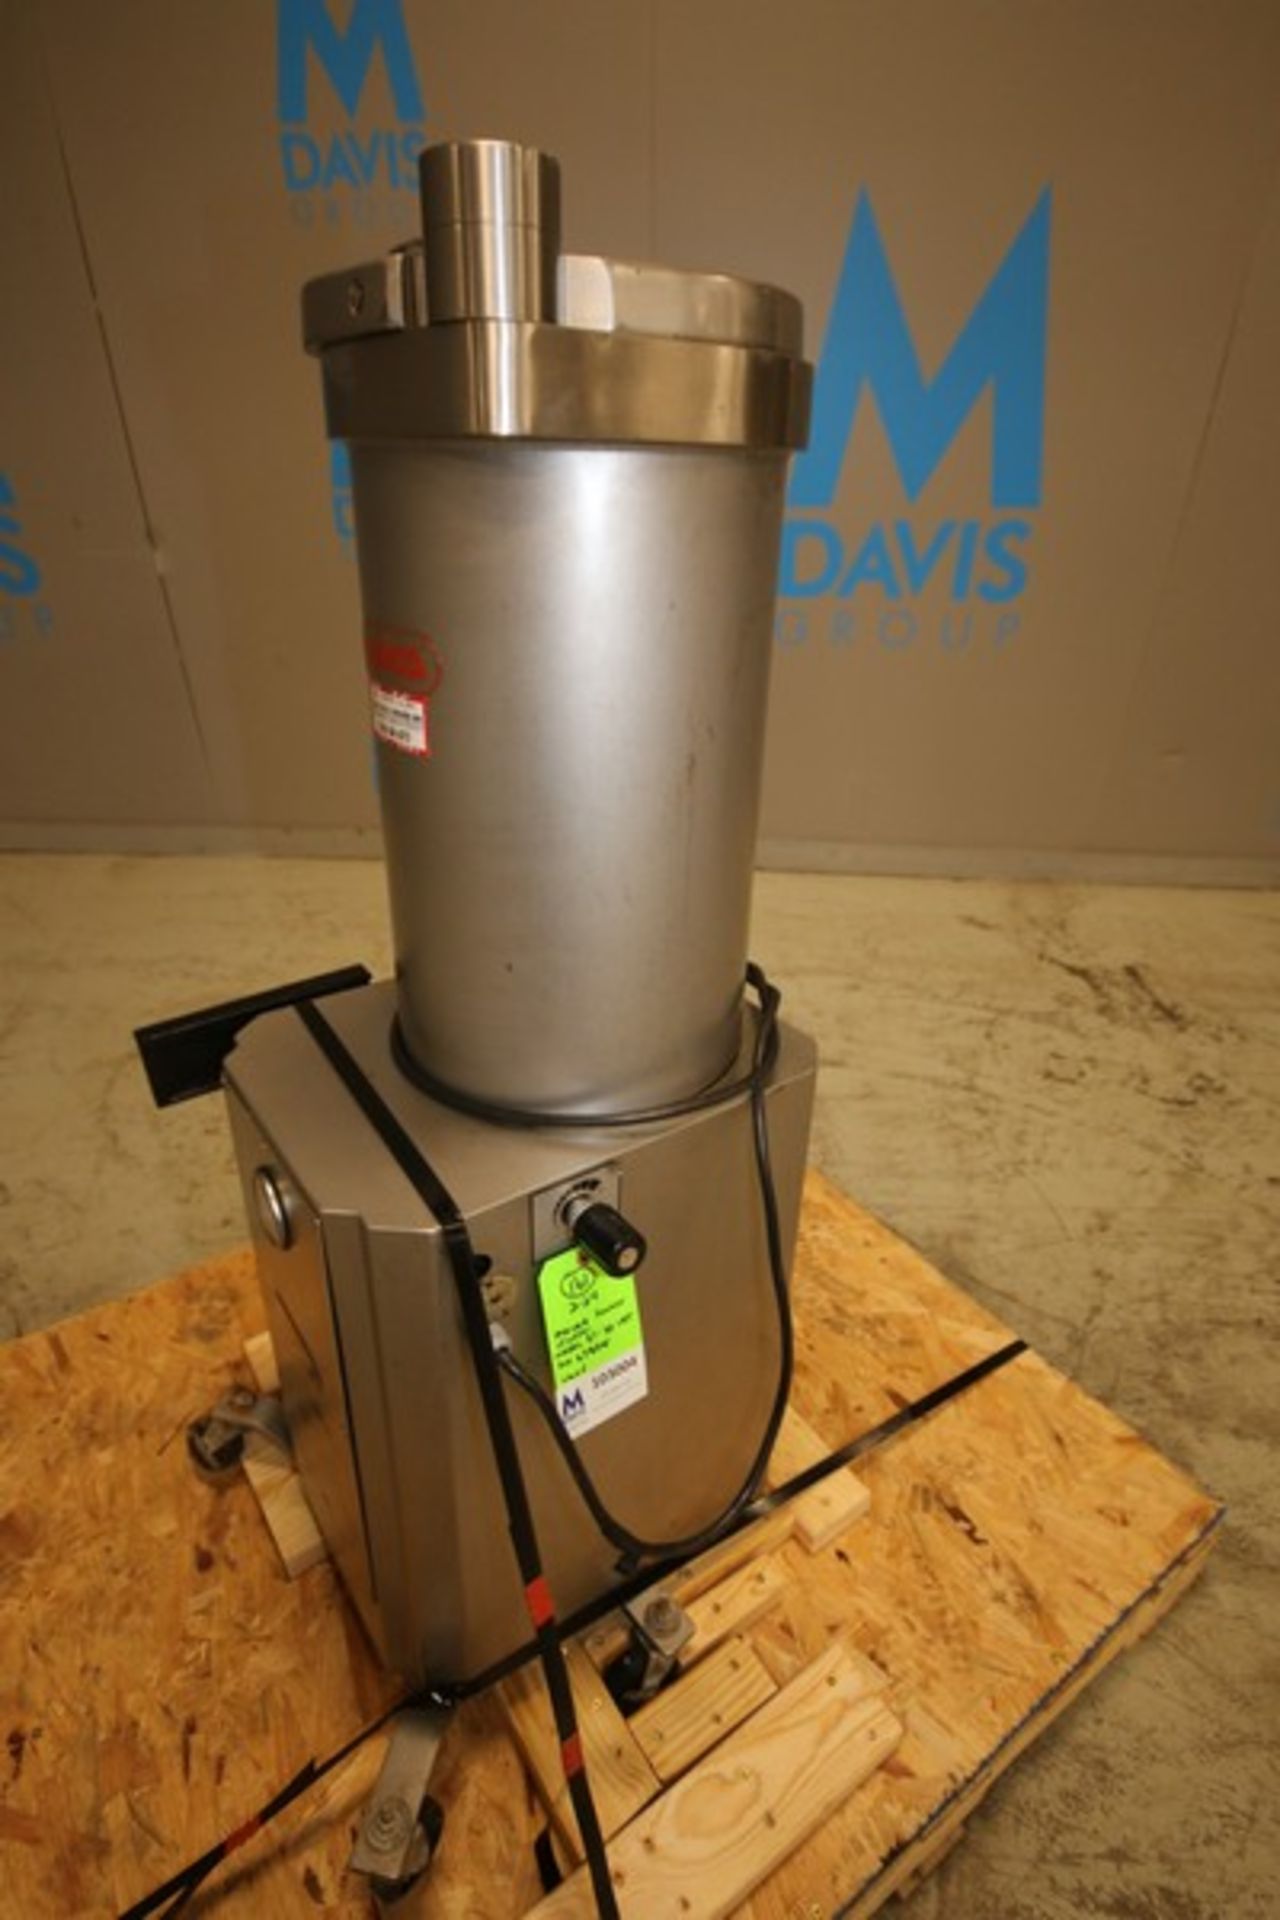 Mainca S/S Sausage Stuffer, Model EI-30 INT, SN 6780N, 220V (INV#103004) (Located @ the MDG - Image 2 of 7